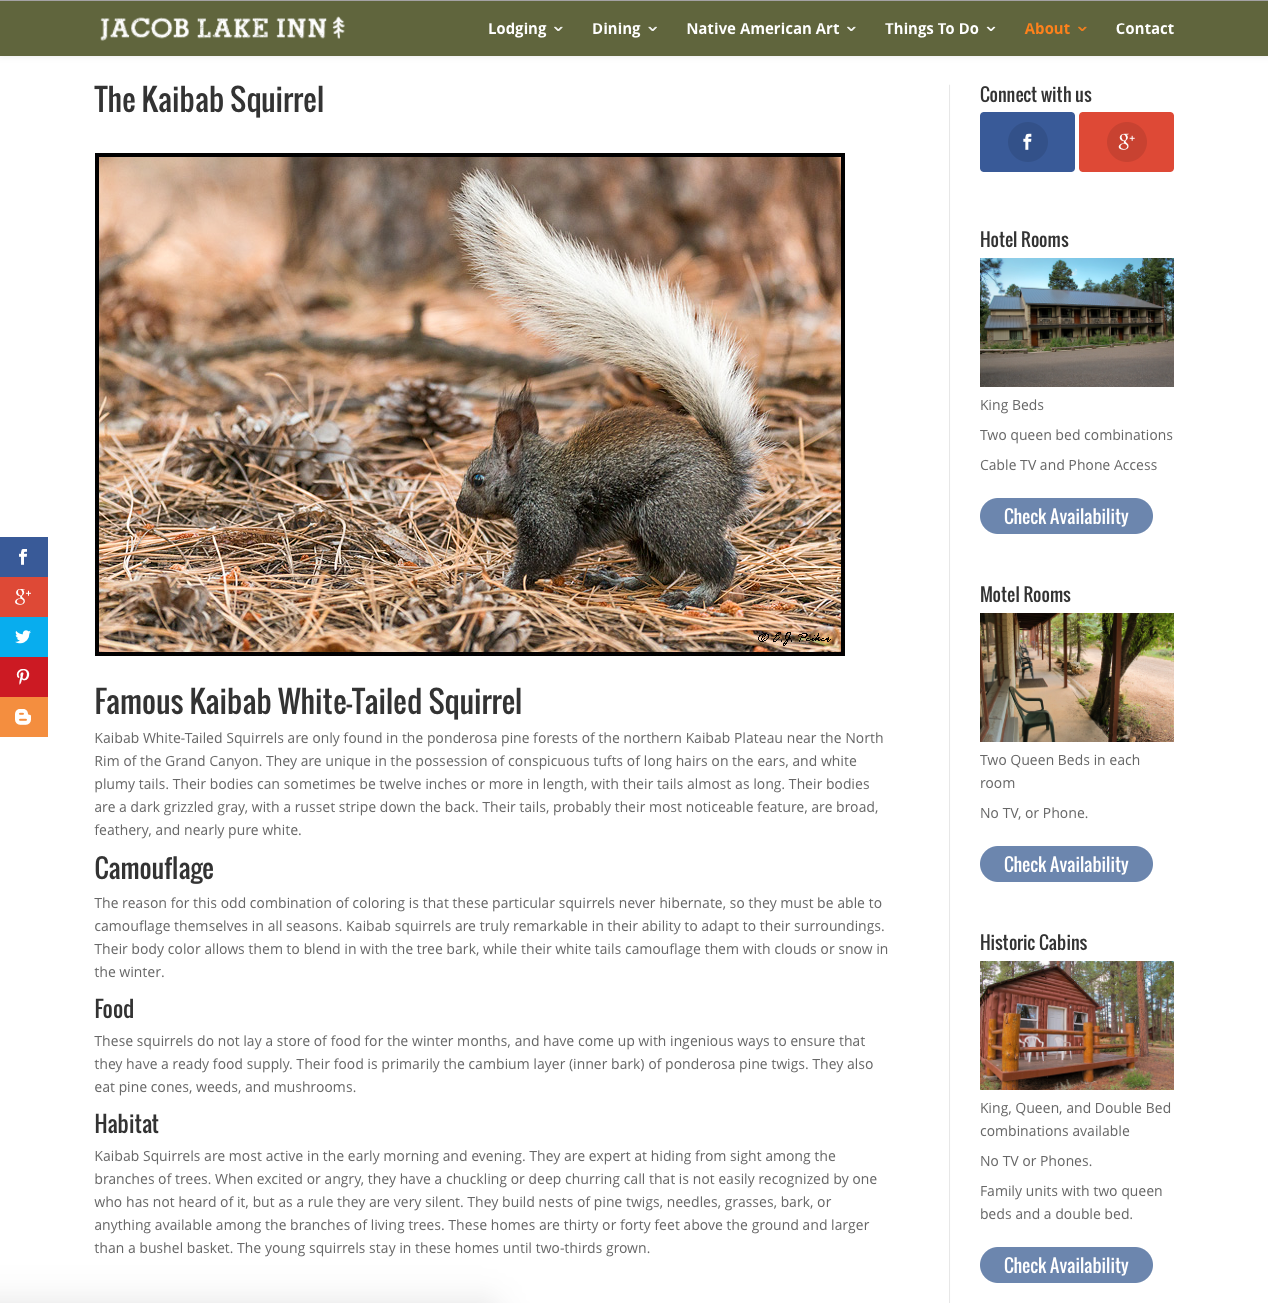 The Kaibab Squirrel Page